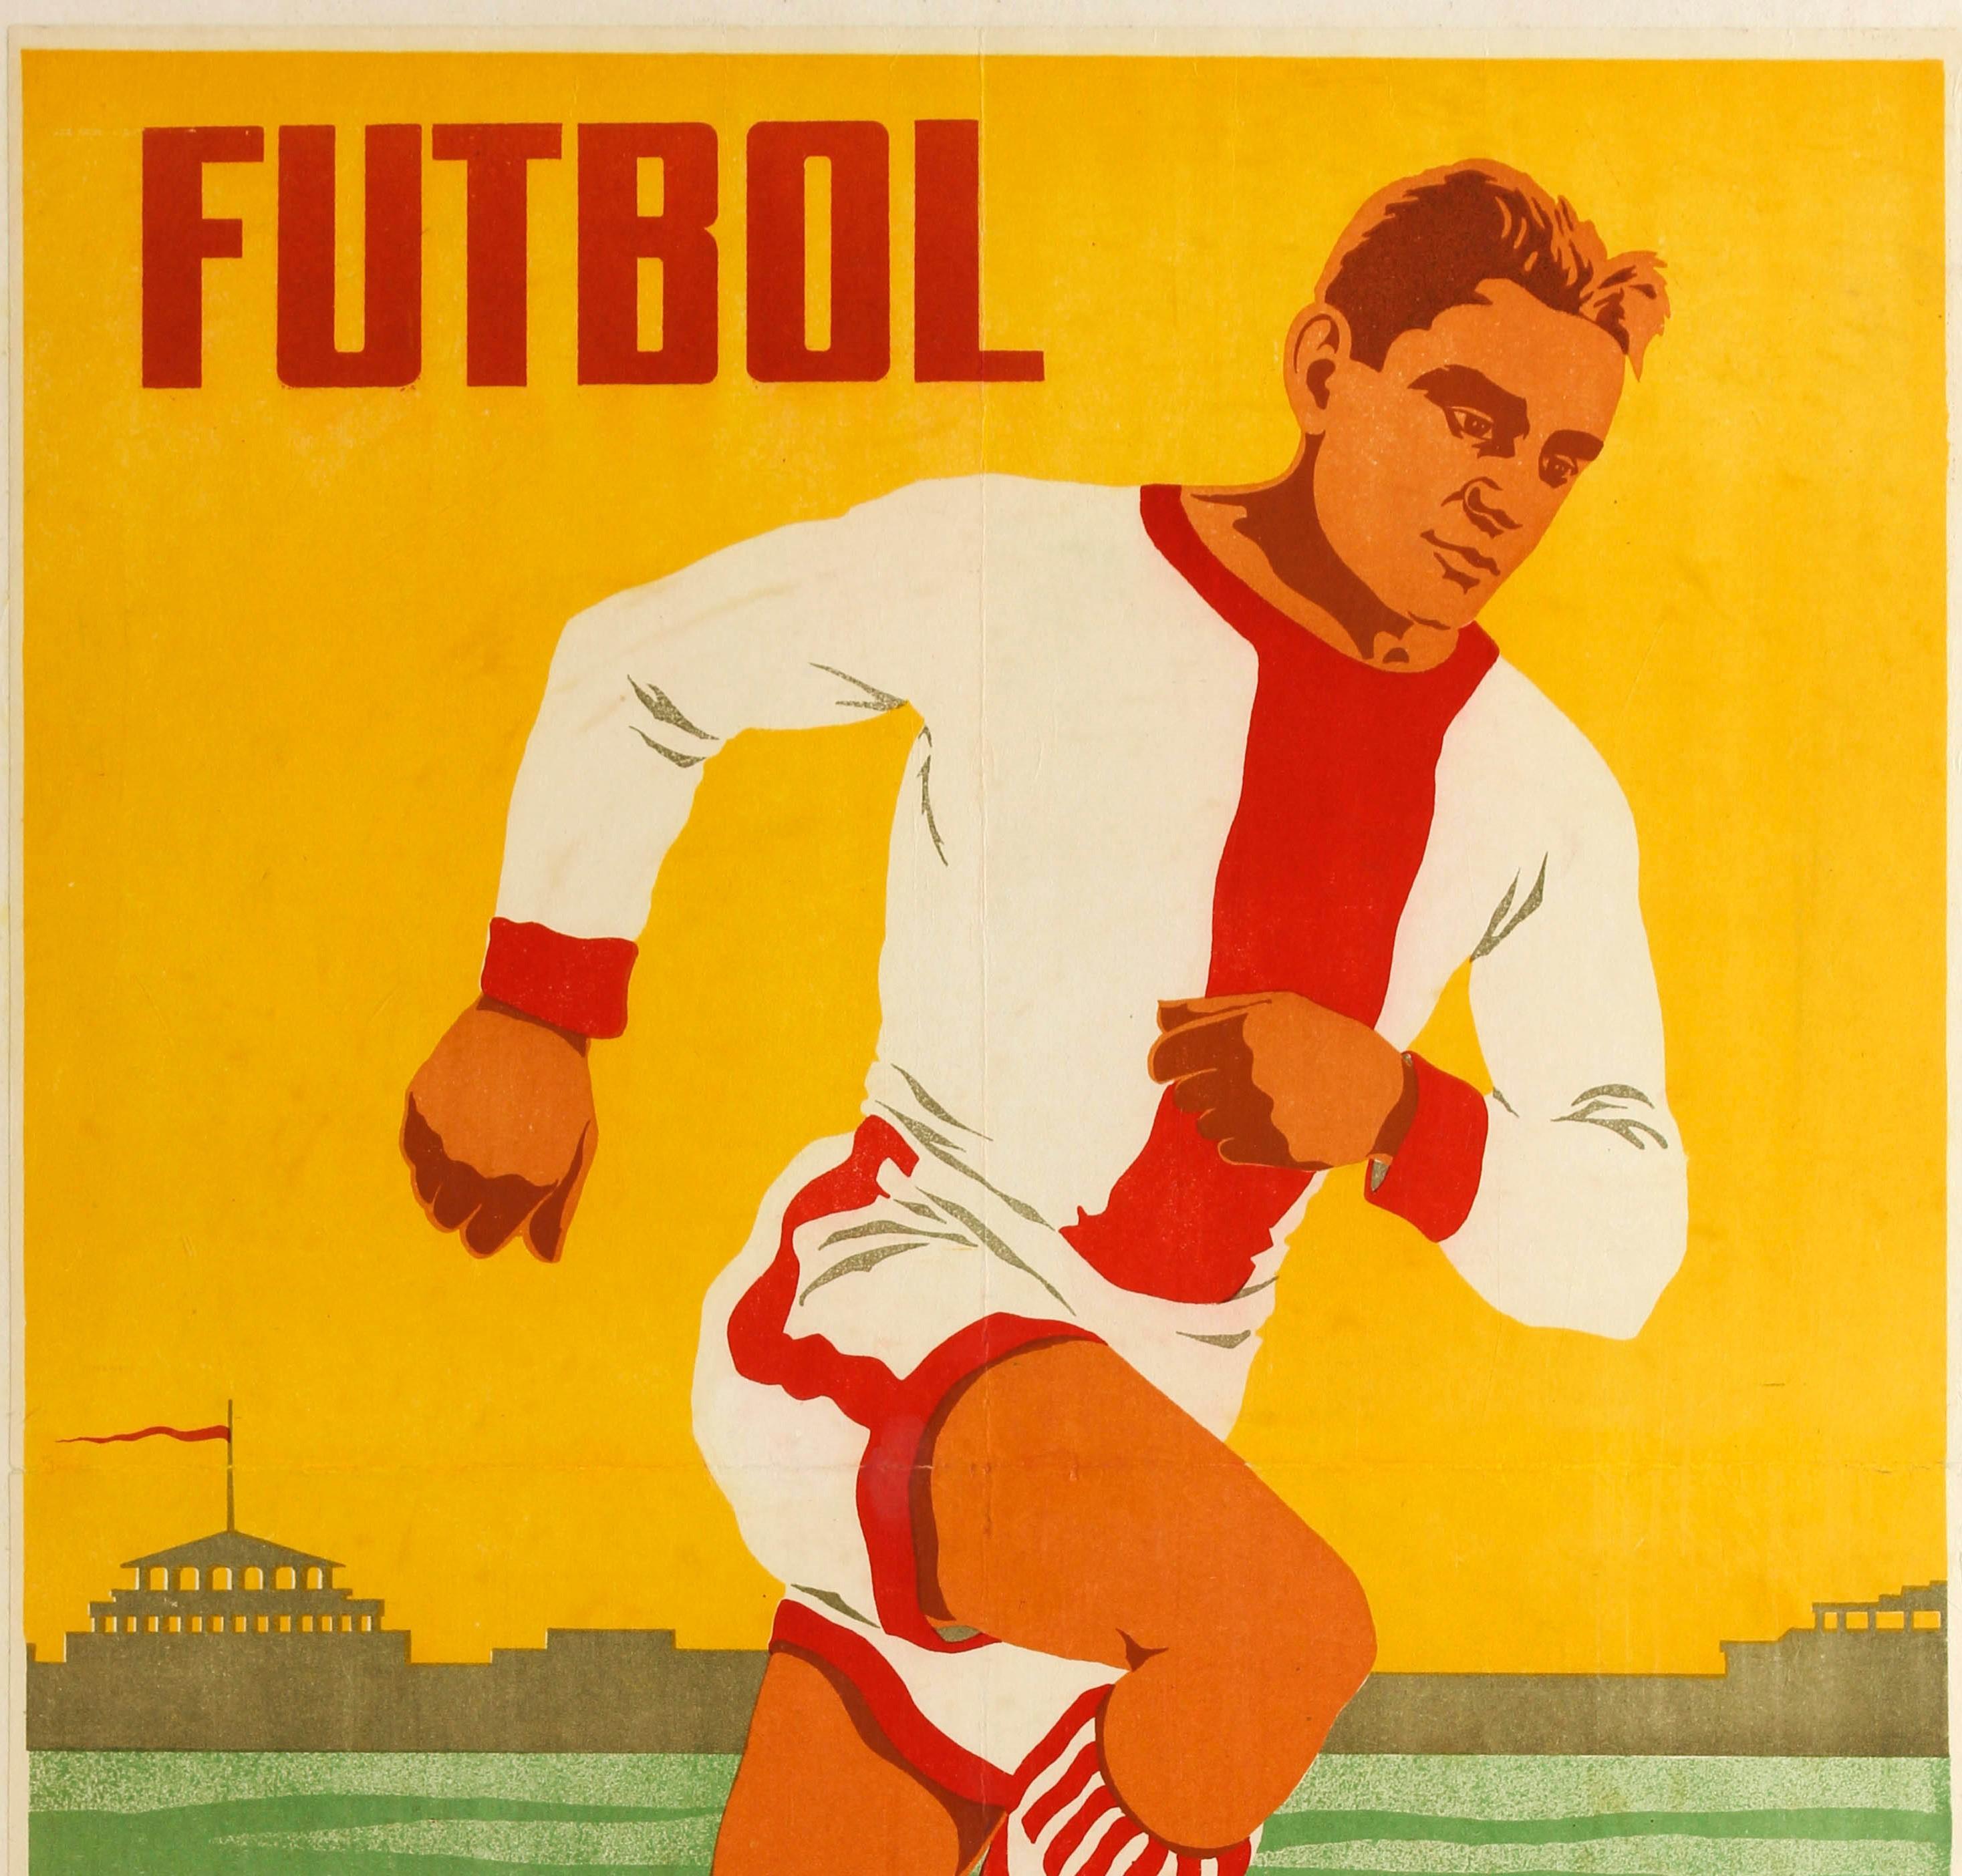 Original vintage Soviet sport poster - Futbol / Football - featuring a player wearing red and white kit running forward and kicking a ball with a red flag flying at the top of the building on the horizon against the yellow sky background, the bold